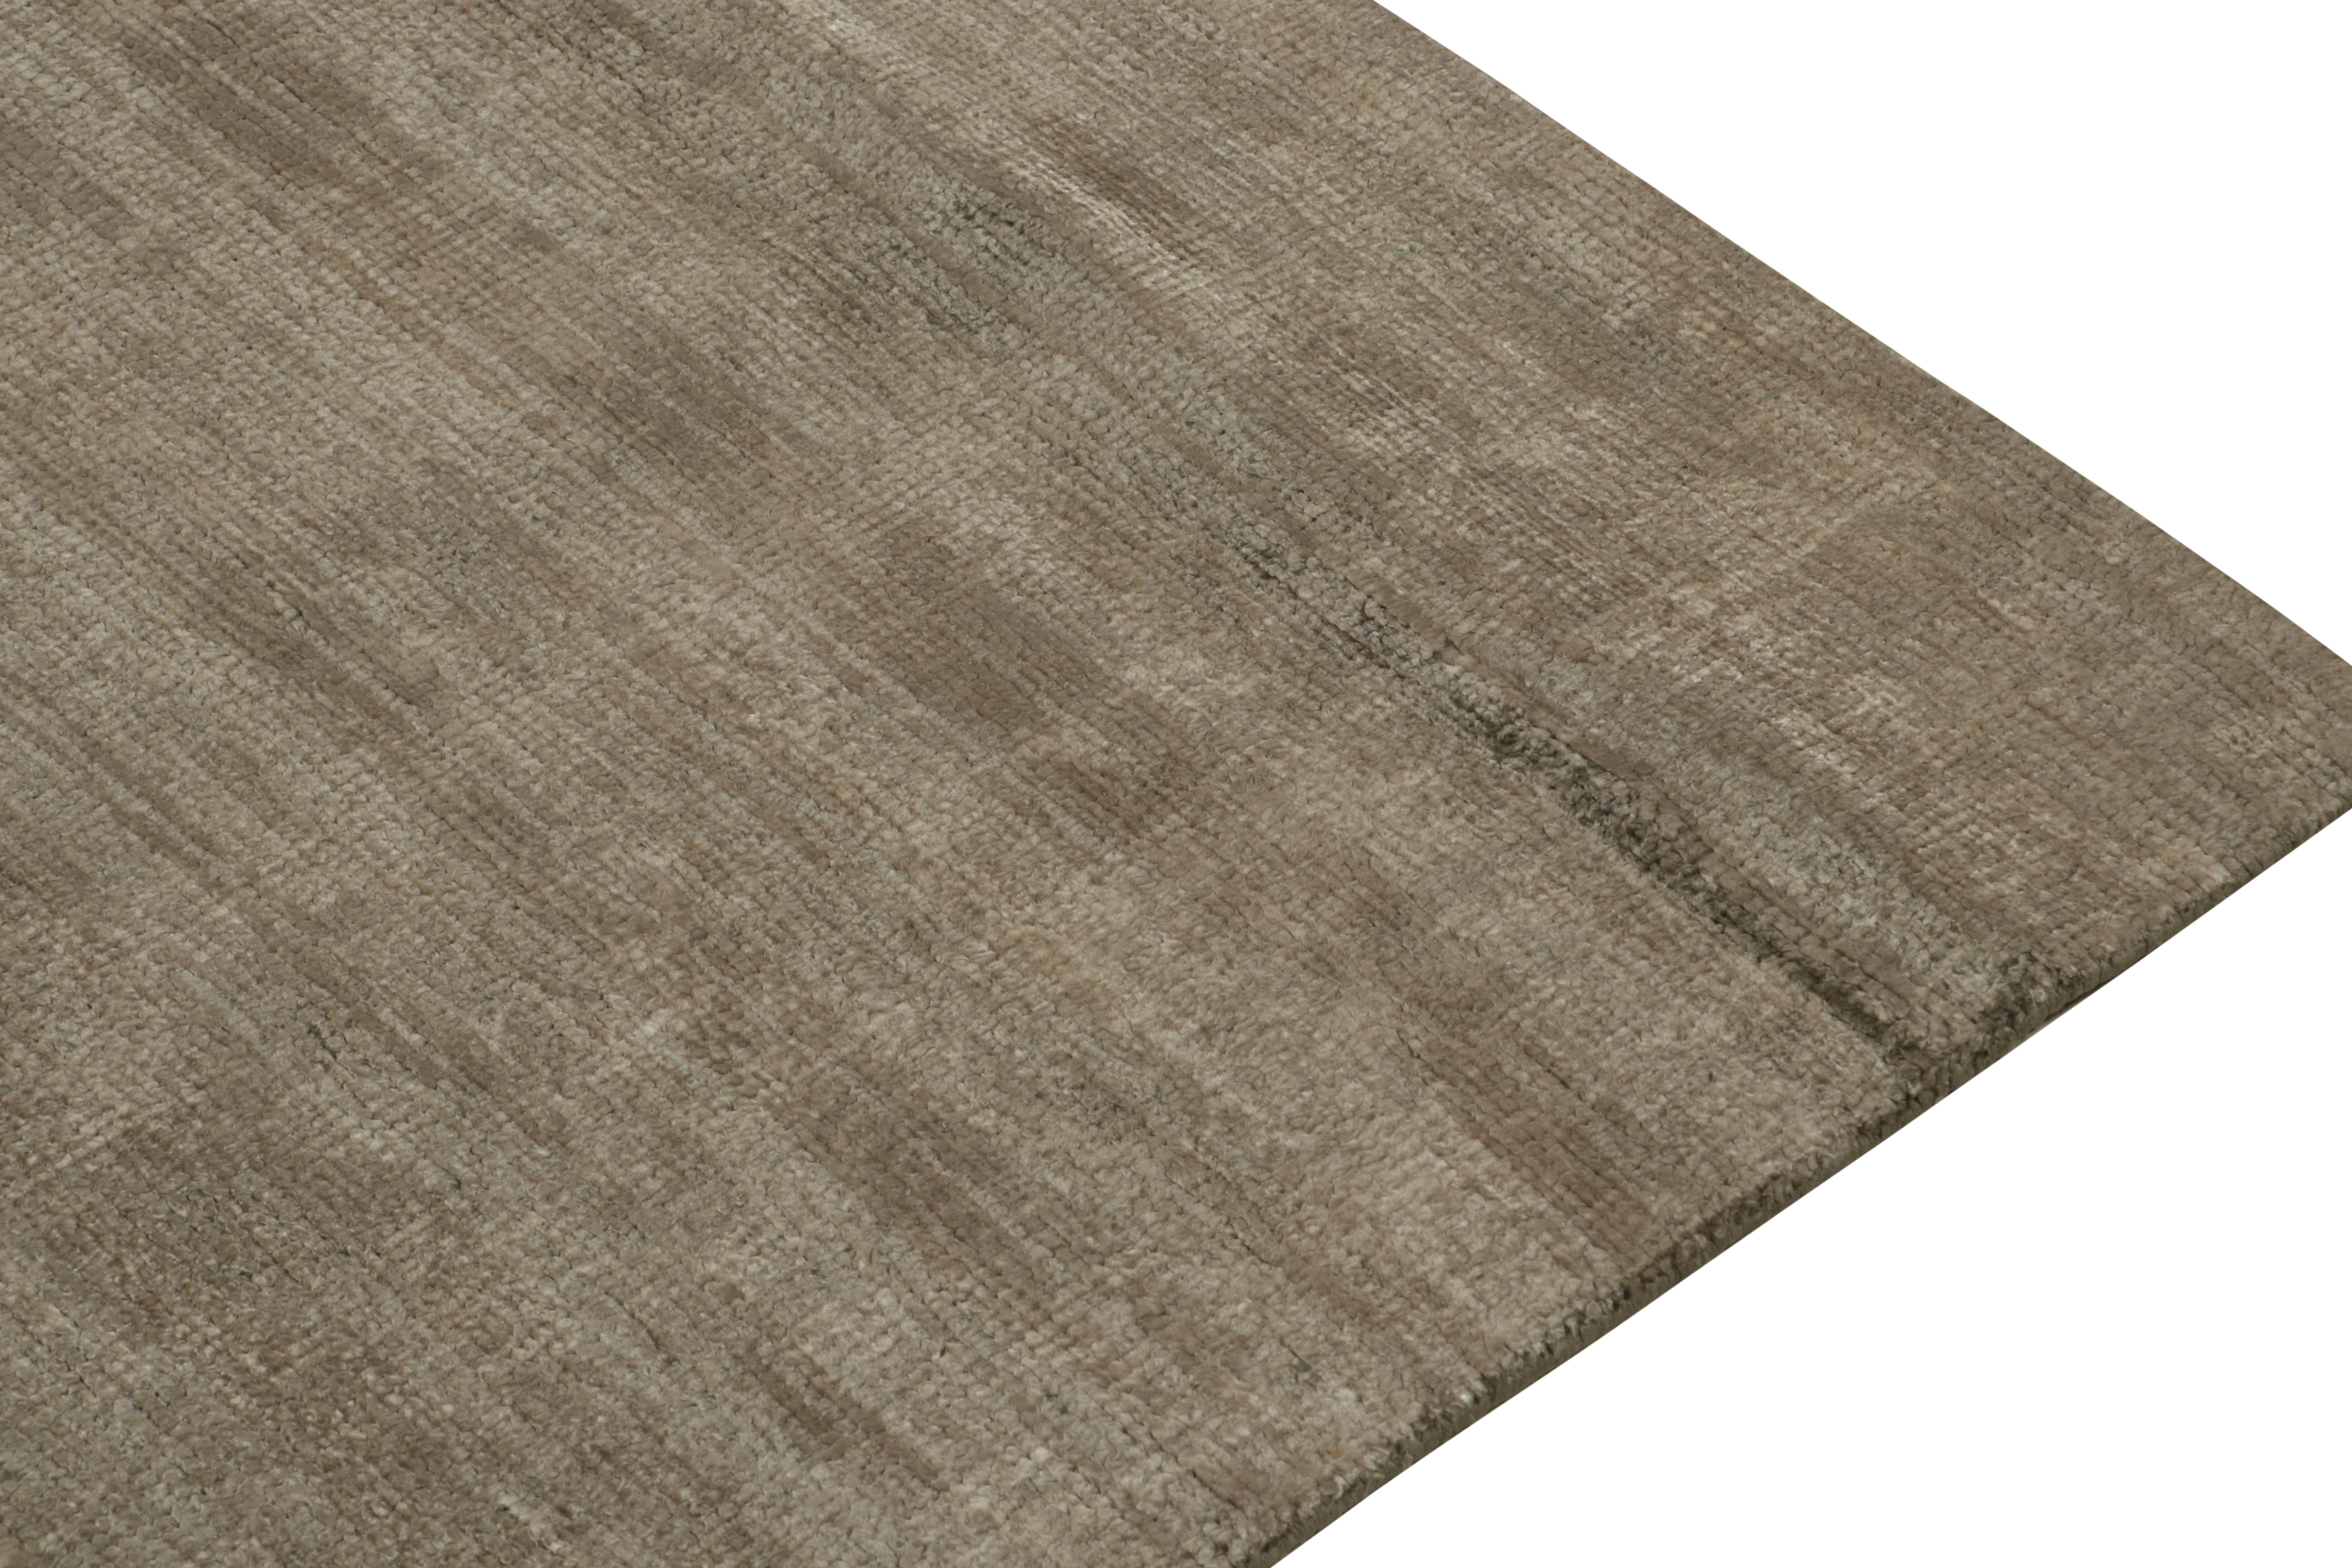 Rug & Kilim’s Solid Gray Rug in Tone-on-tone Hand-Knotted Silk Striae In New Condition For Sale In Long Island City, NY